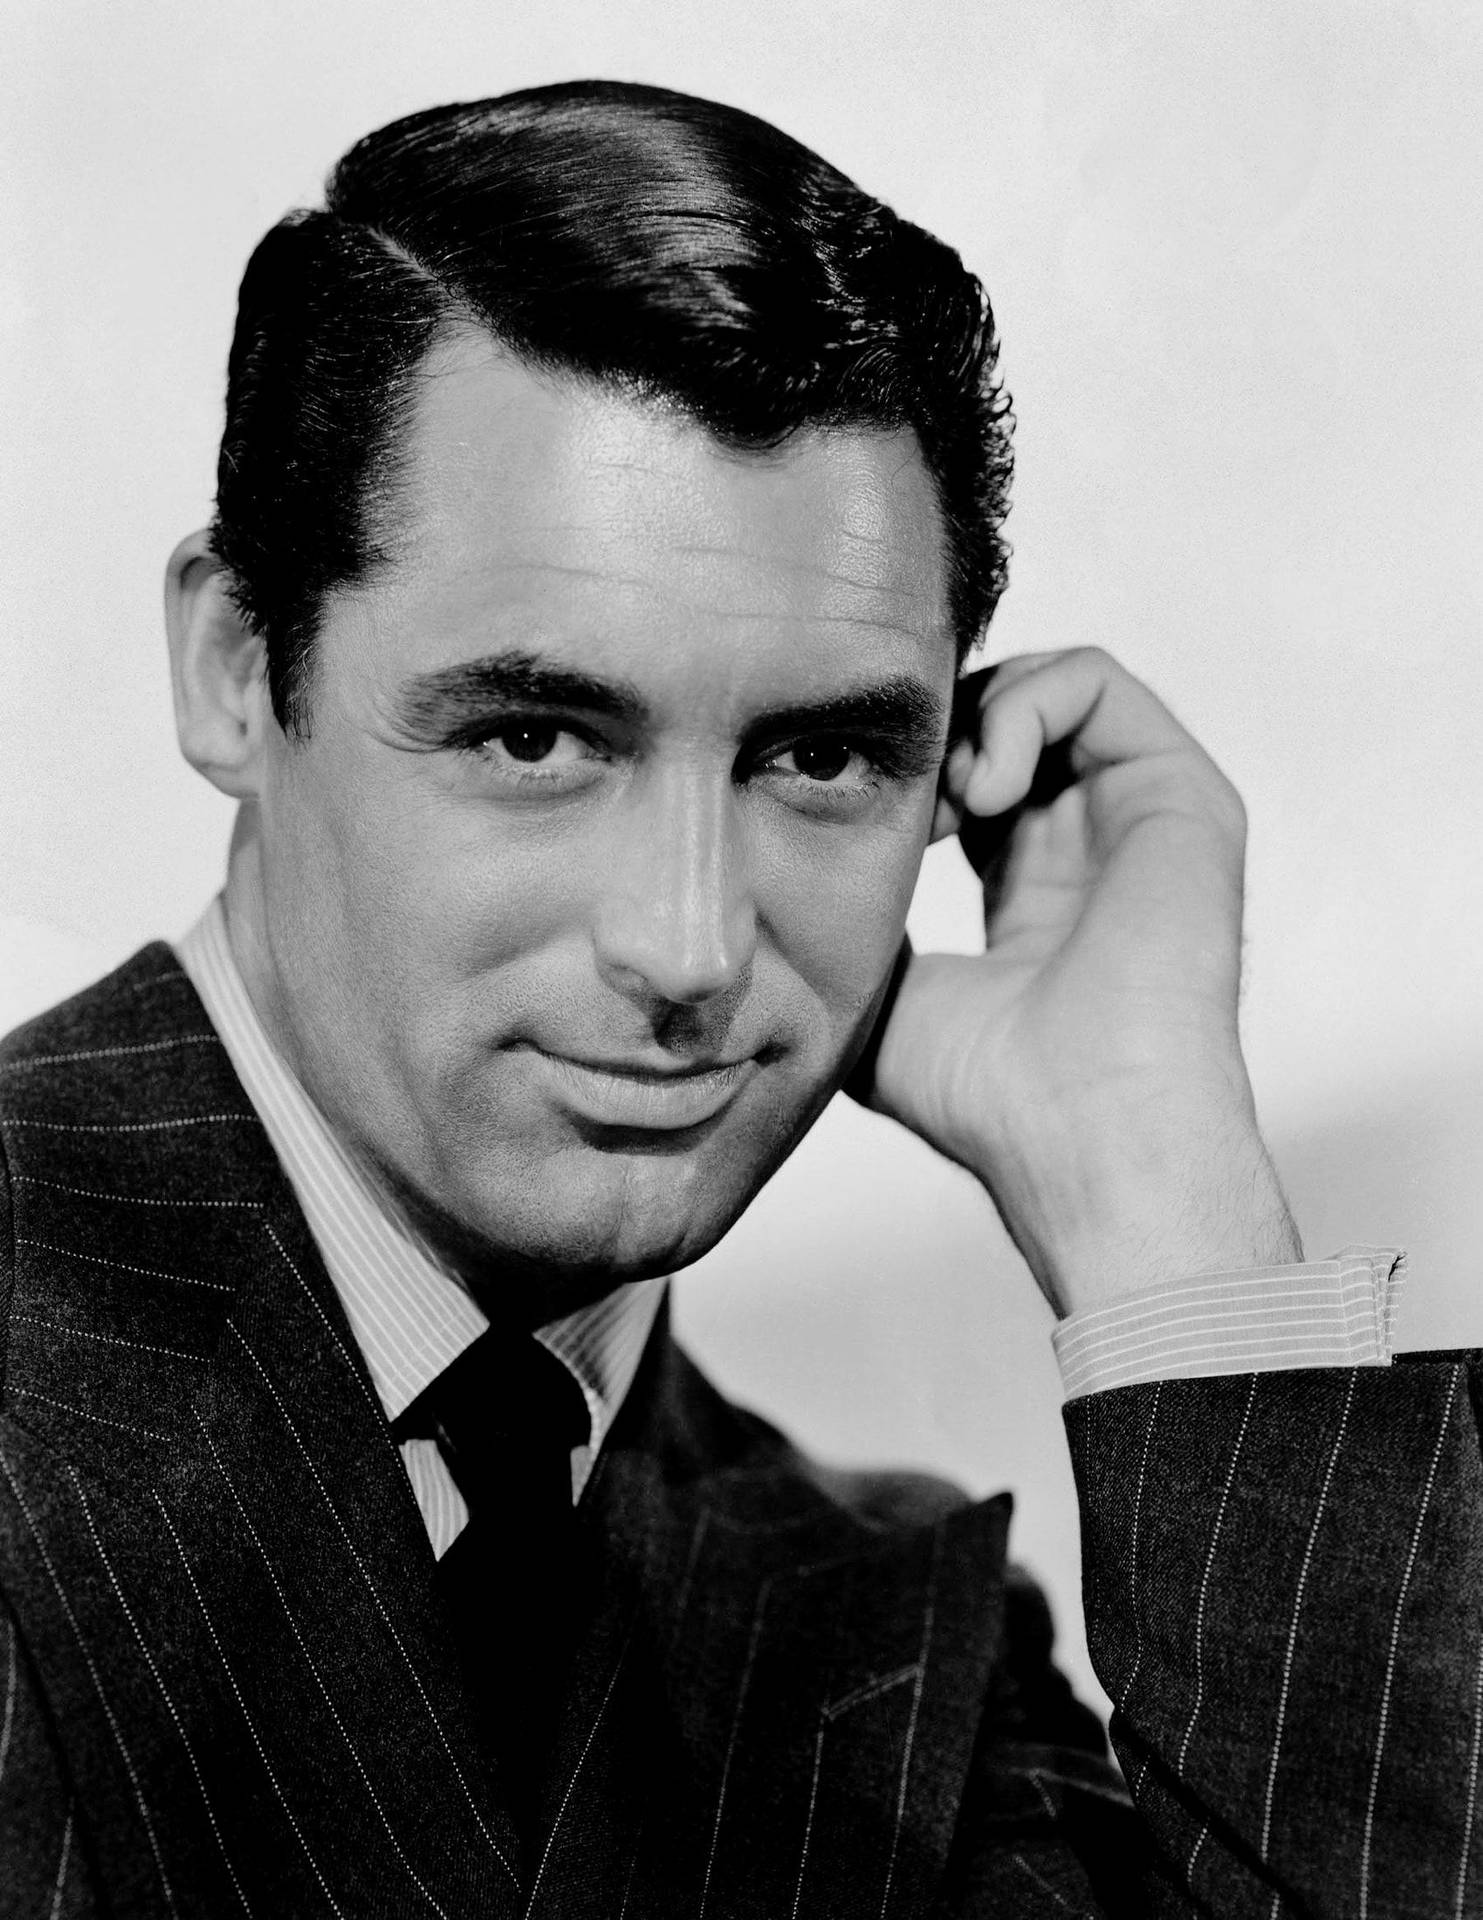 Cary Grant - The Classic Hollywood Charmer Background